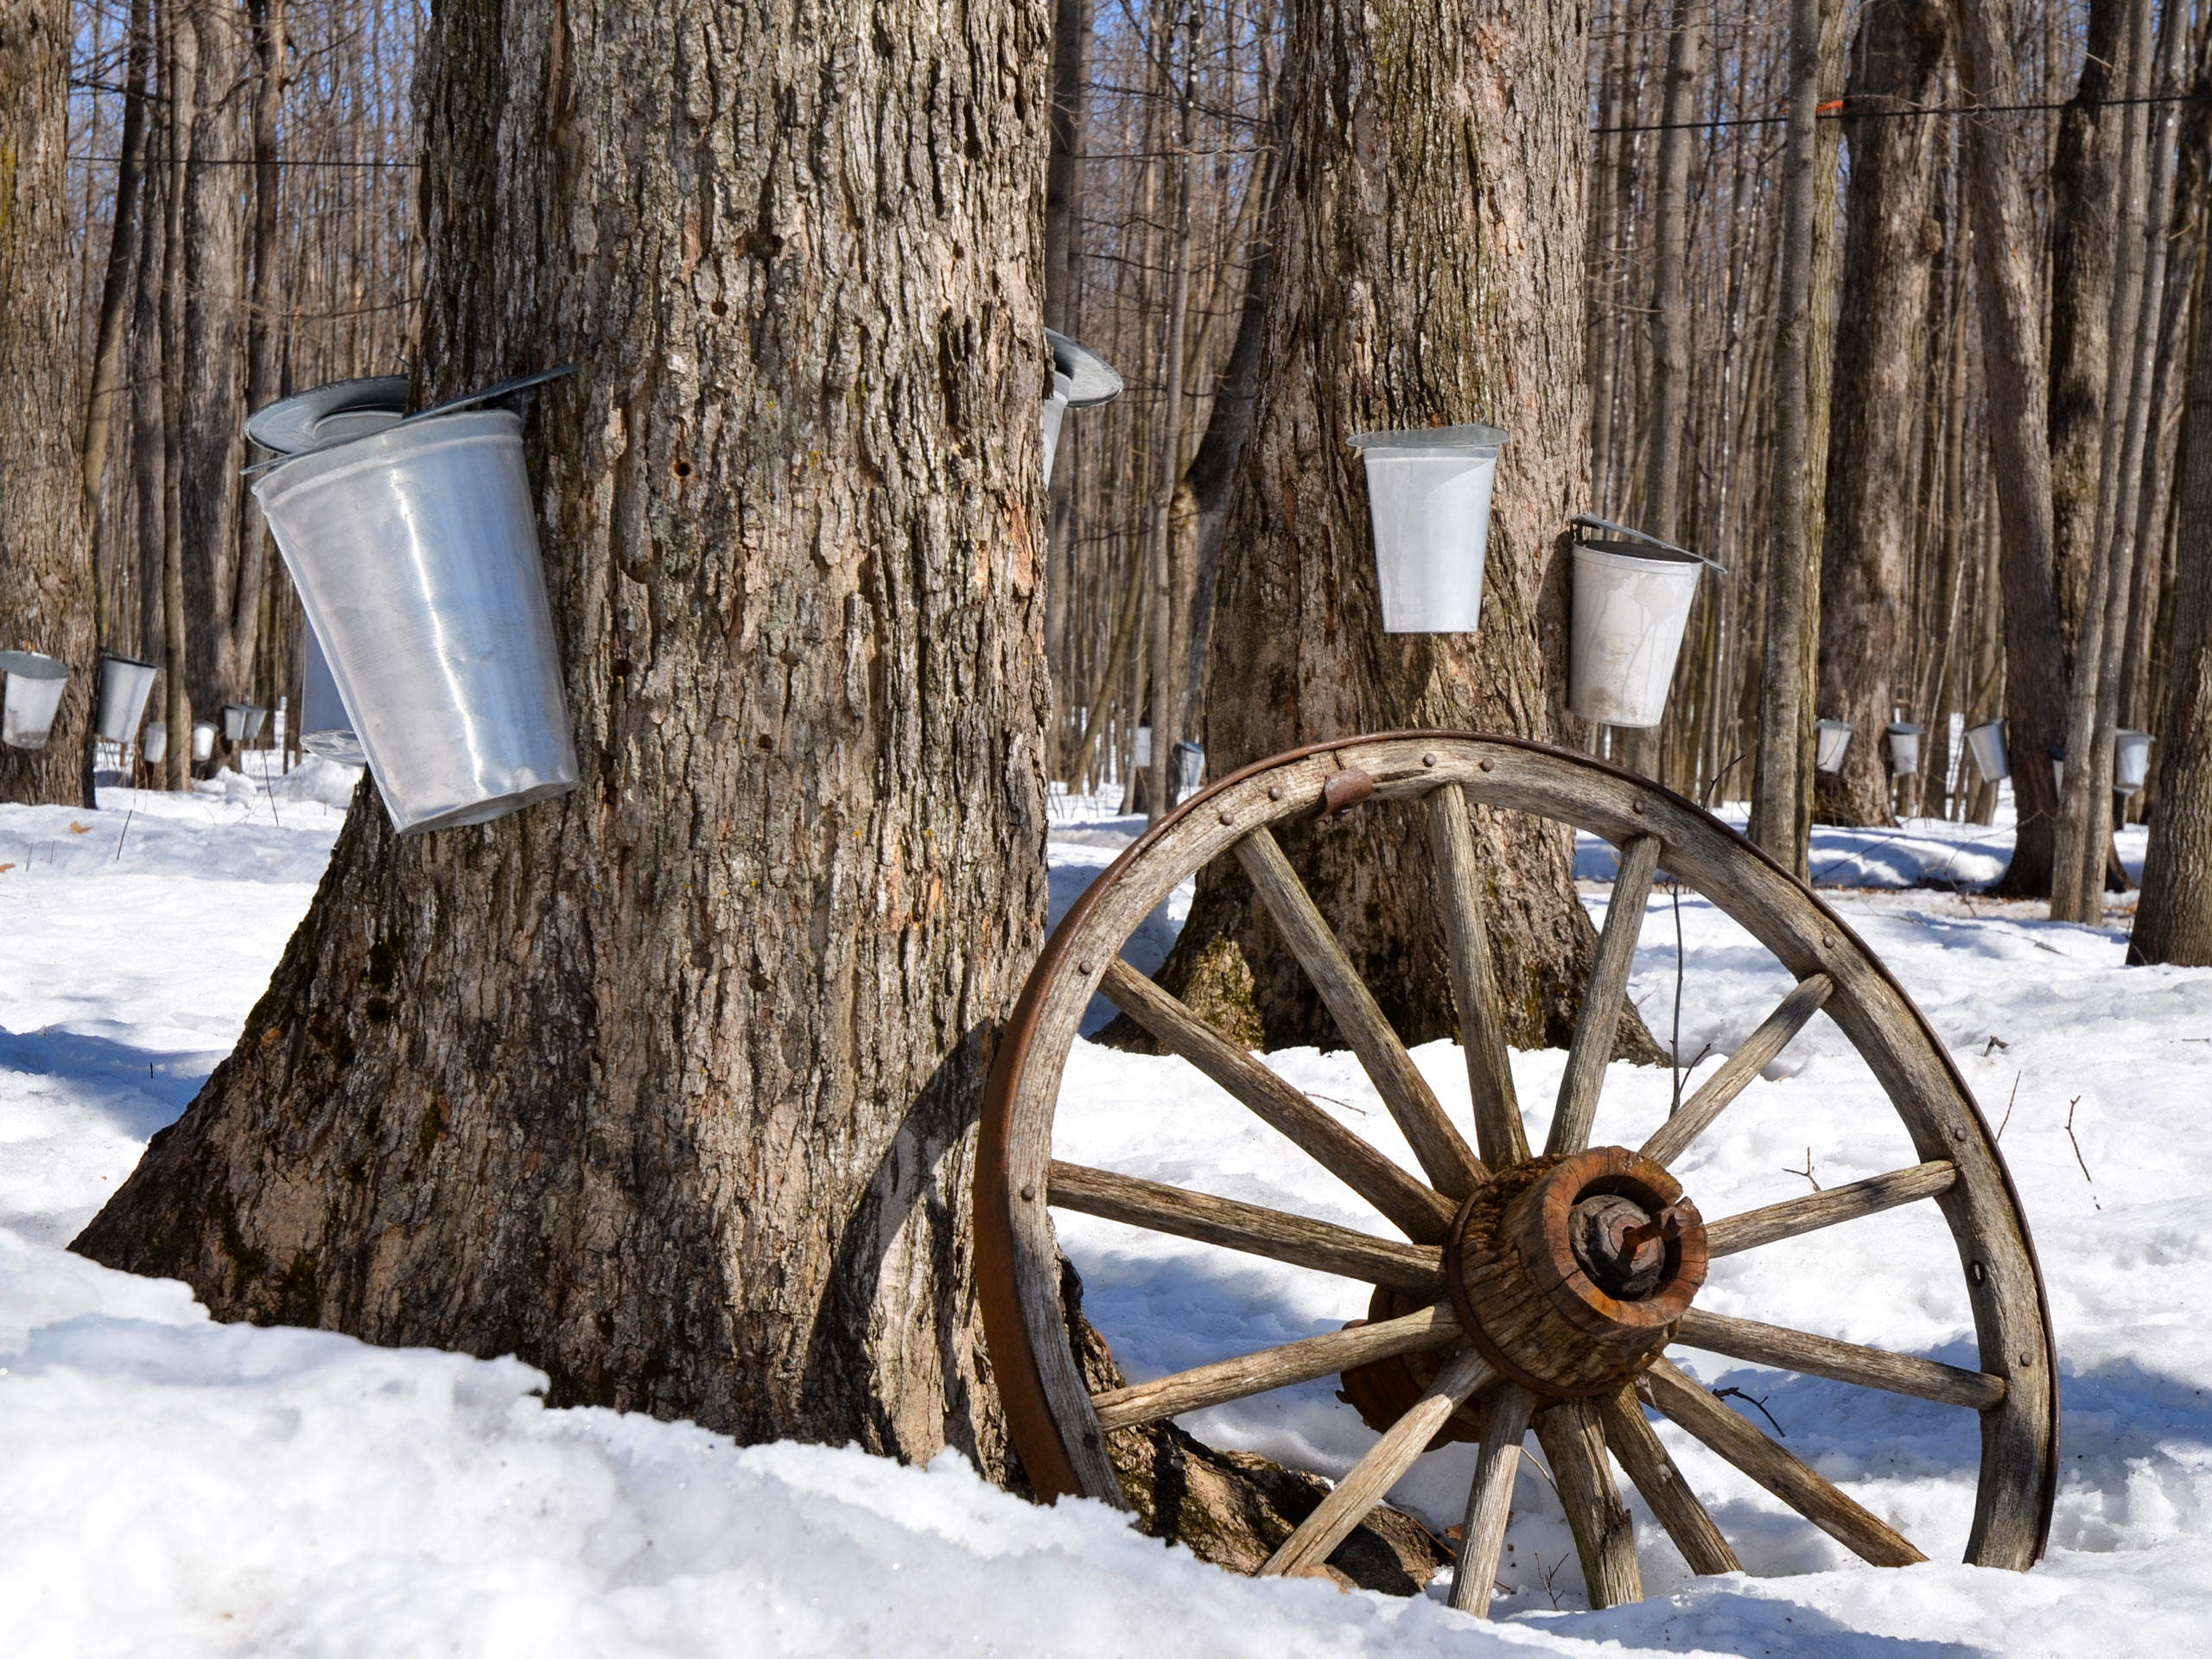 Sugar Shack Quebec traditional maple syrup making